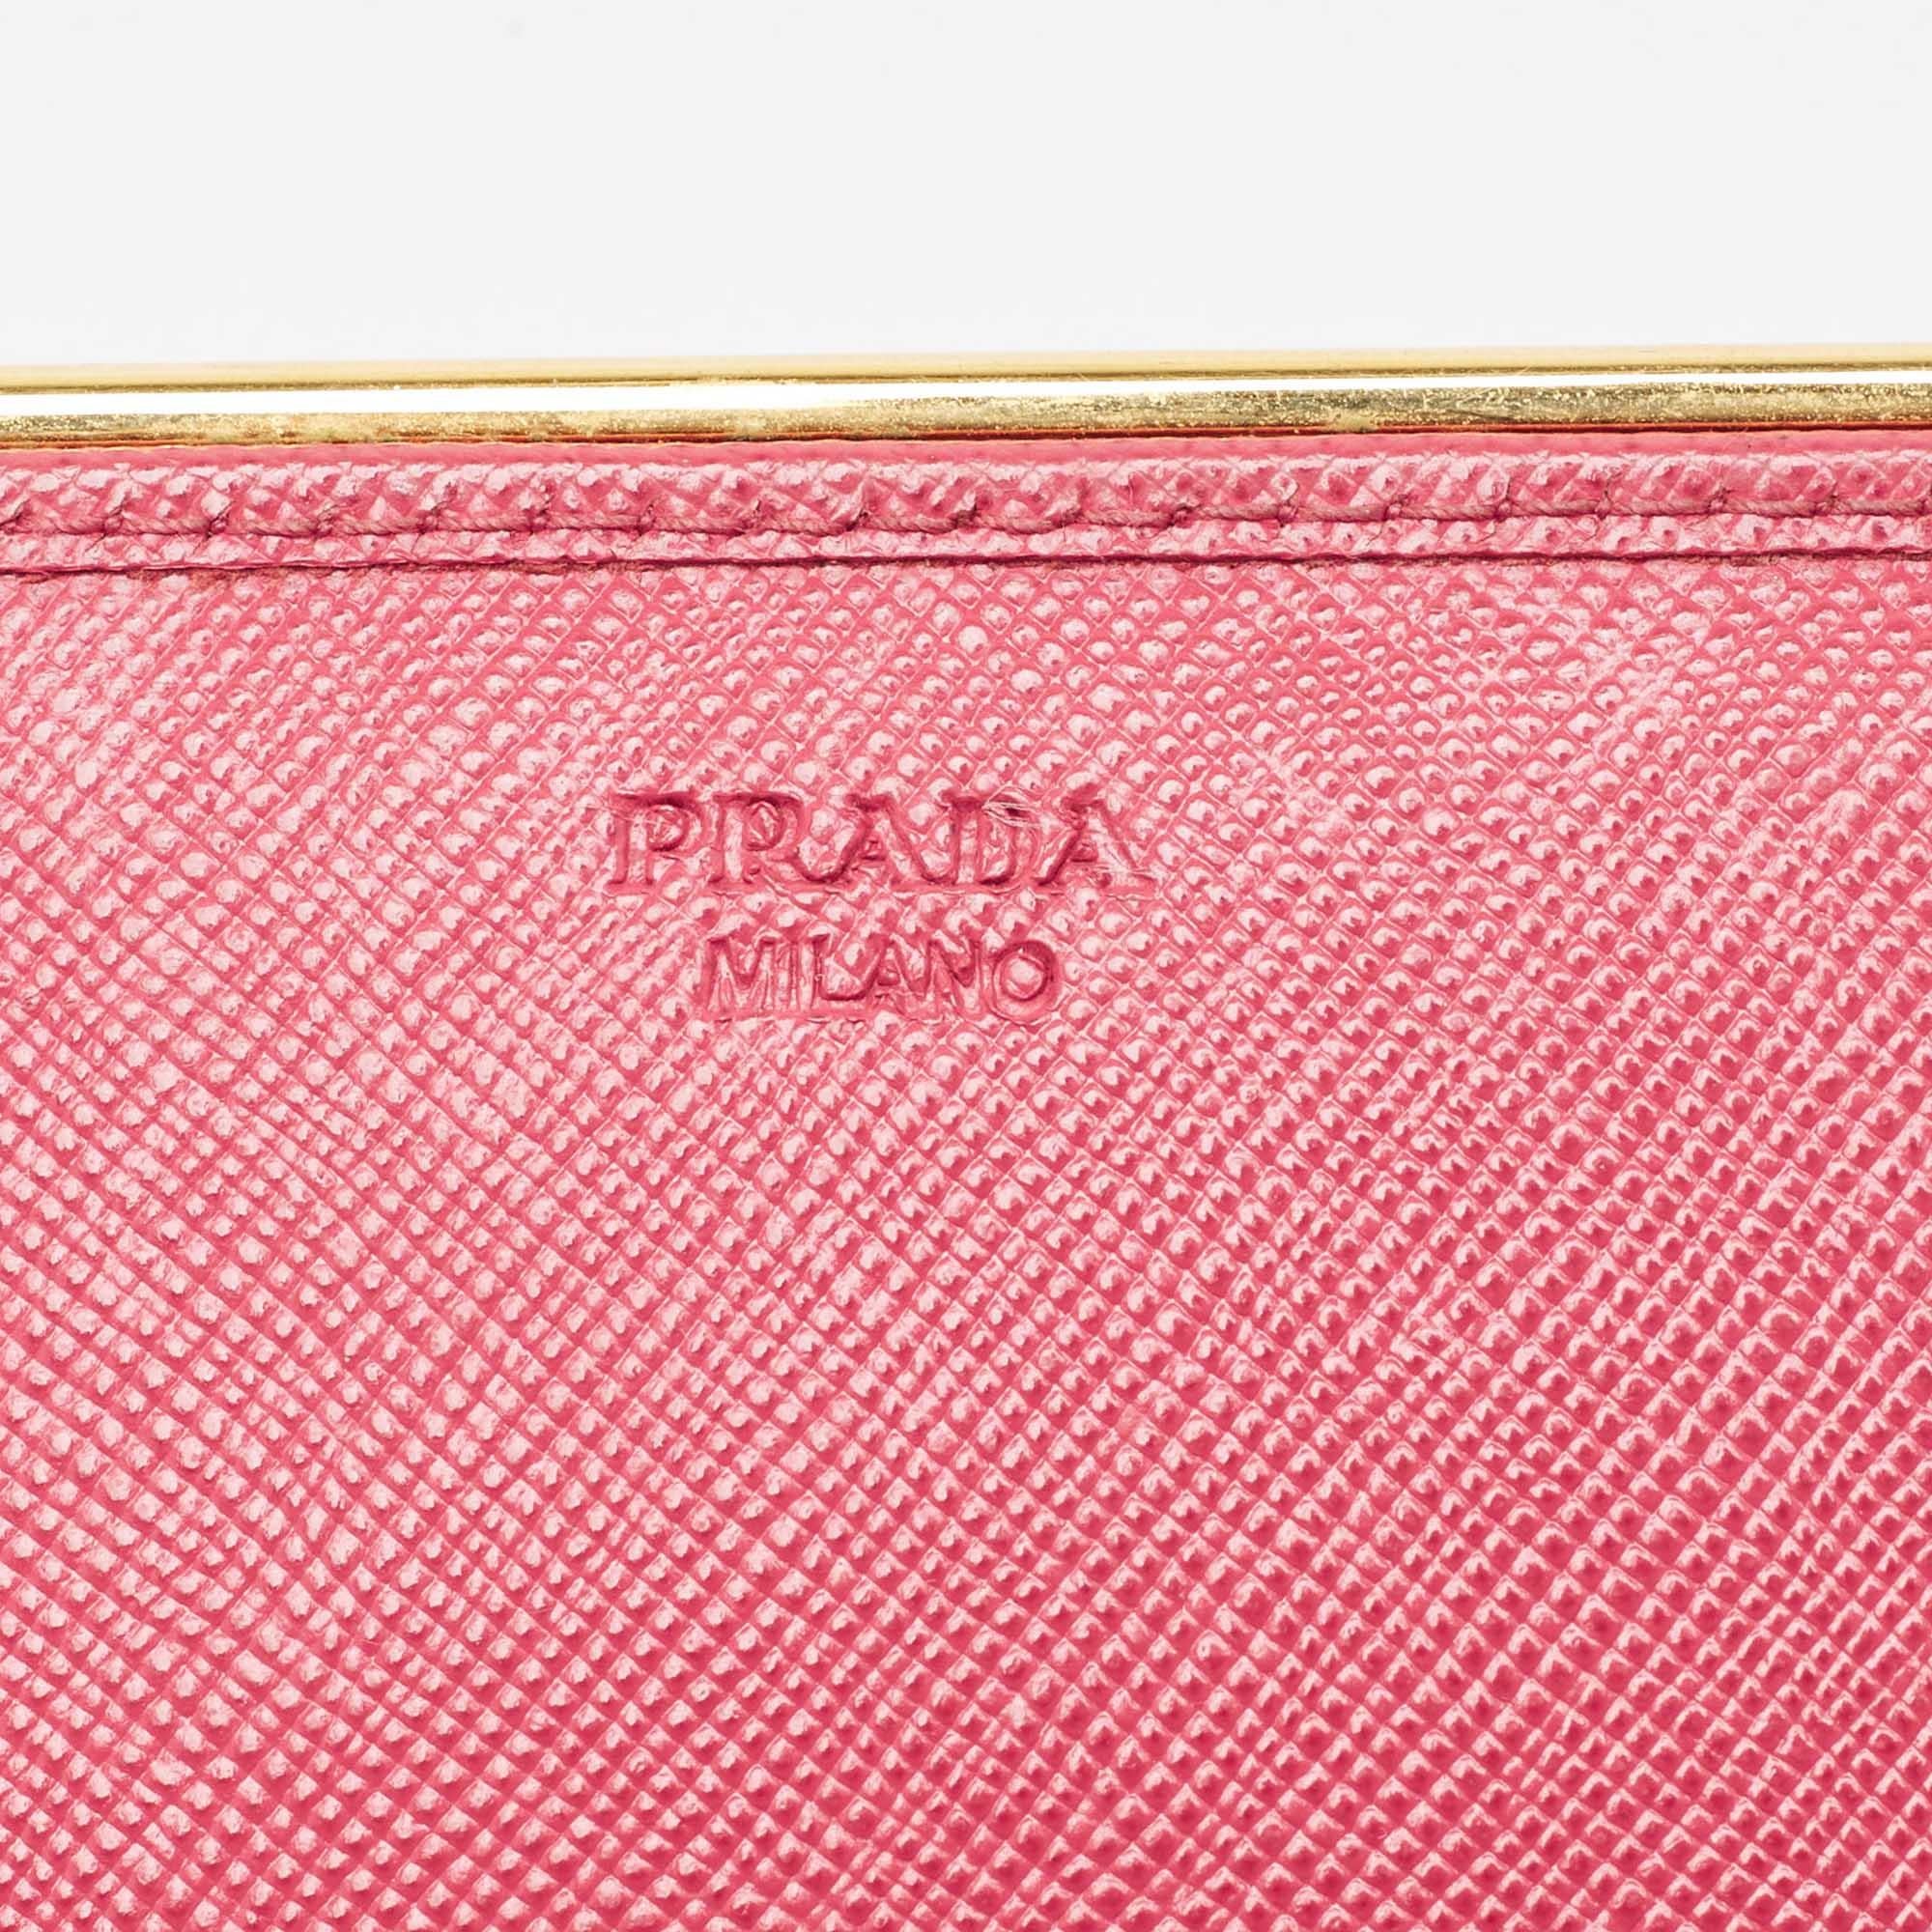 Prada Pink Saffiano Leather Metal Detail Continental Wallet For Sale 7